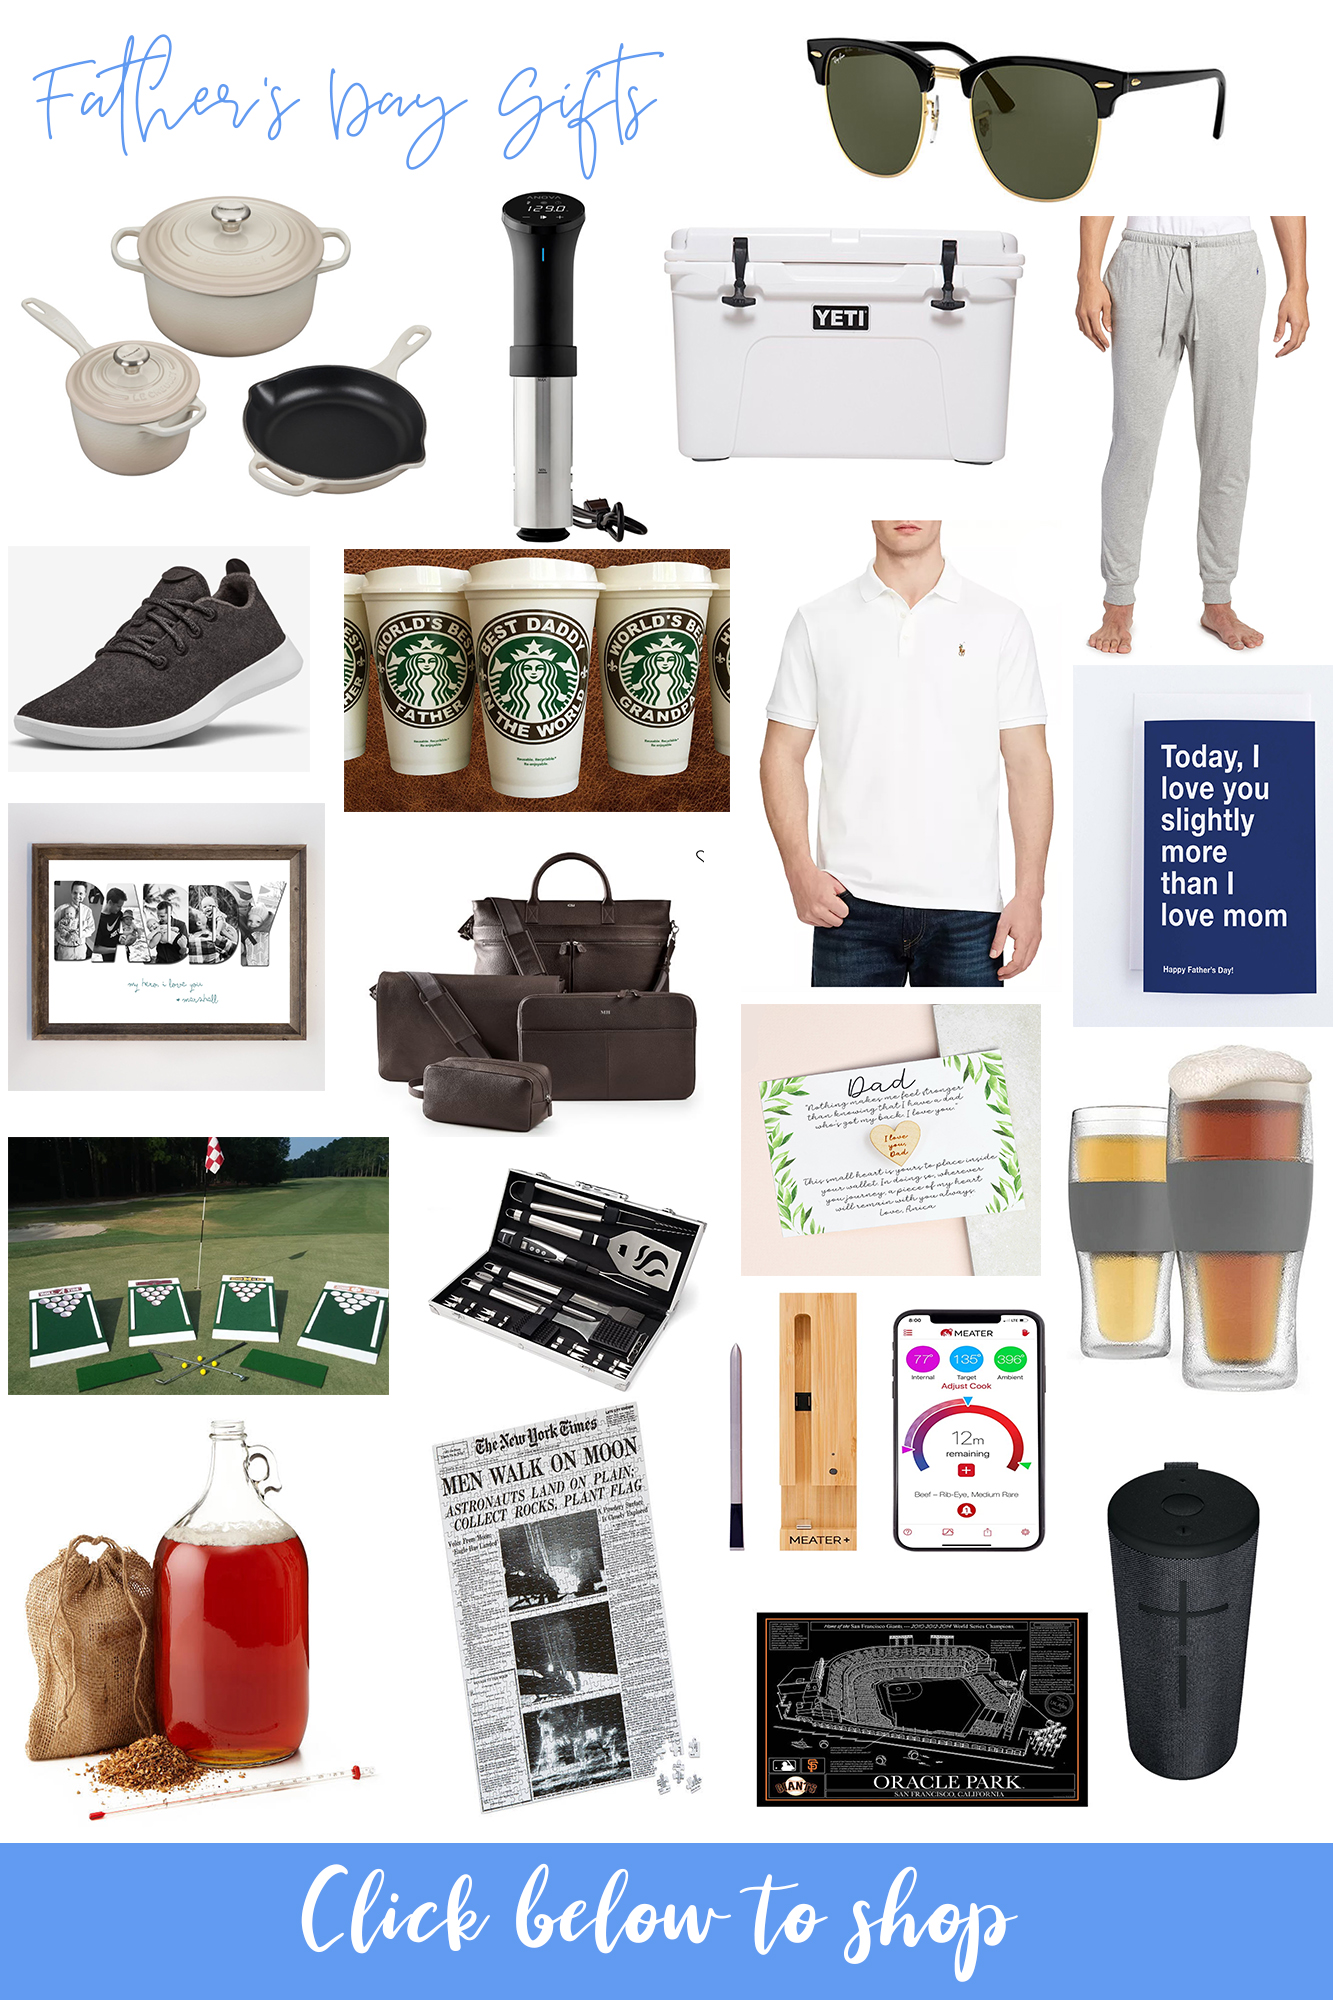 Last Minute Father's Day Gift Guide 2020 - Affordable, fun and sweet gifts to give the father figure in your life. Wide range of products and options!